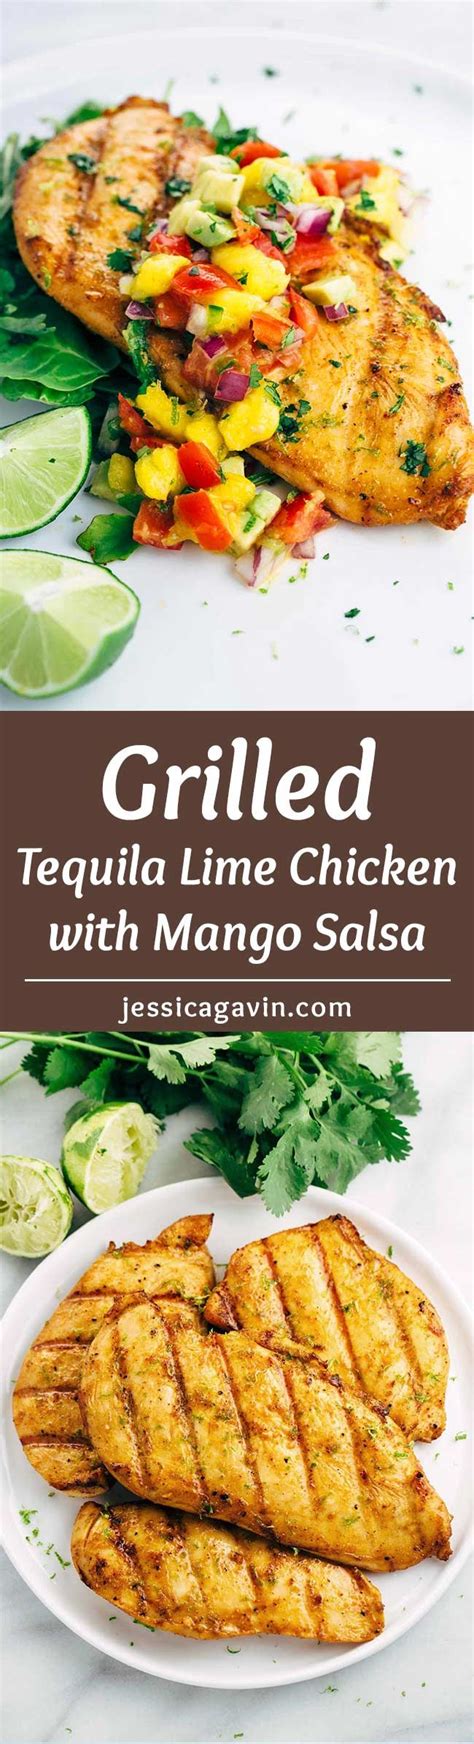 This flavorful mango chicken marinade combines fresh mango, honey, lime, sriracha, and a touch of garlic for a wonderfully tasty baked or grilled chicken dinner! Tequila Lime Chicken with Mango Salsa | Recipe | Tequila ...